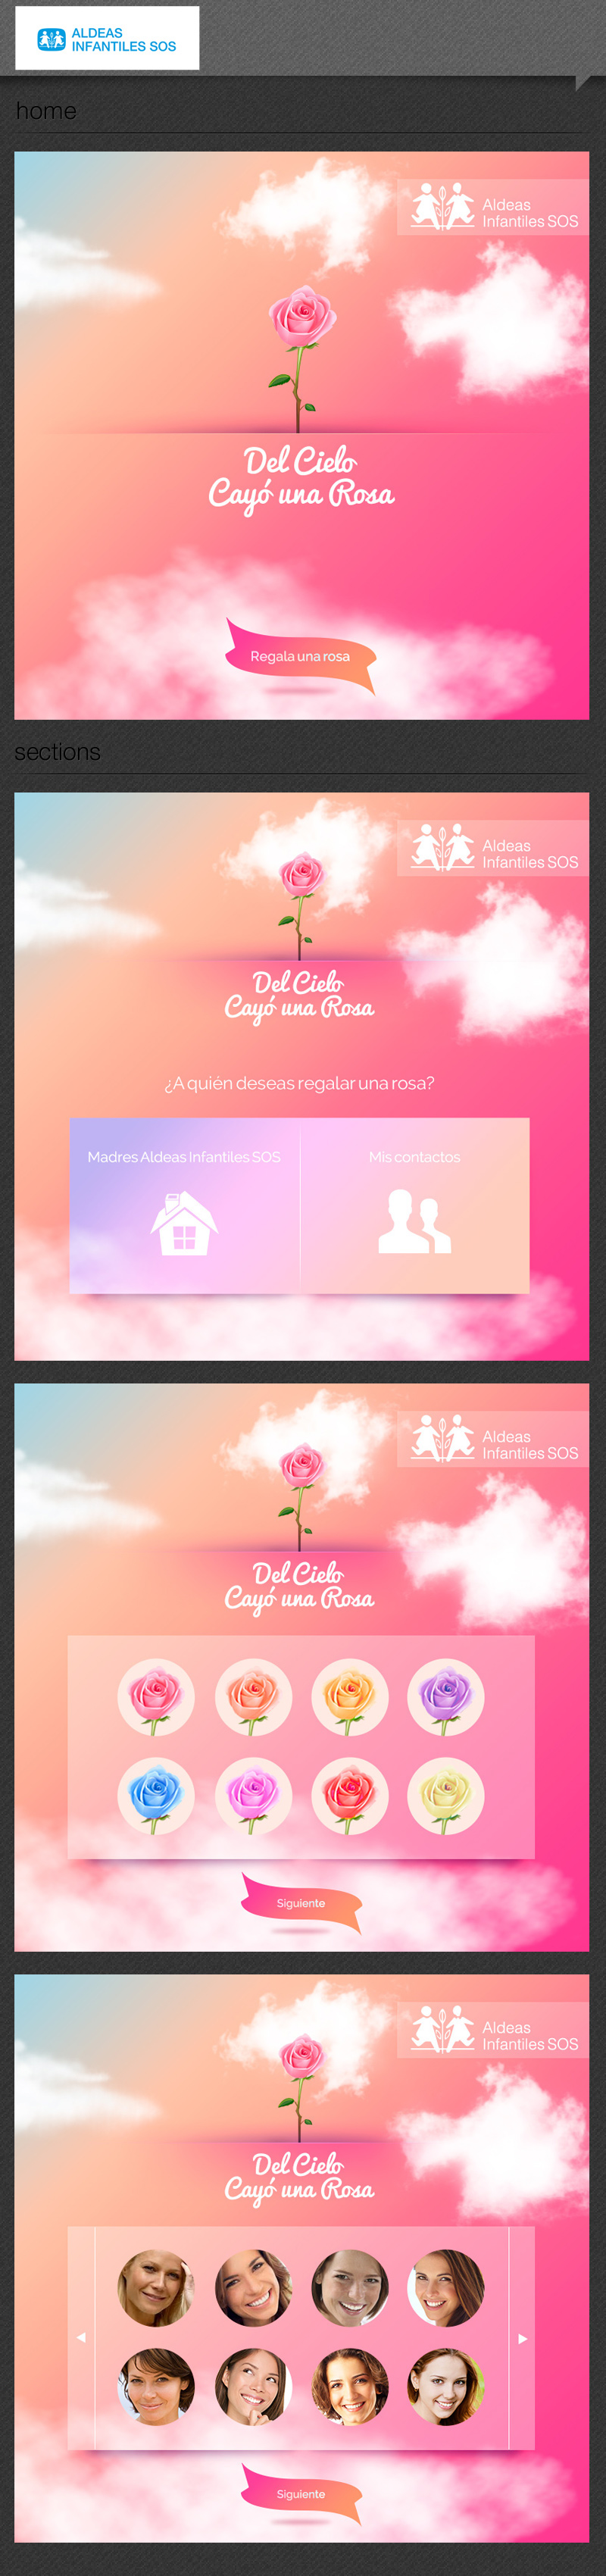 facebook app ArtDirection graphicdesign Webdesign mothersday charity Pastels clouds cute